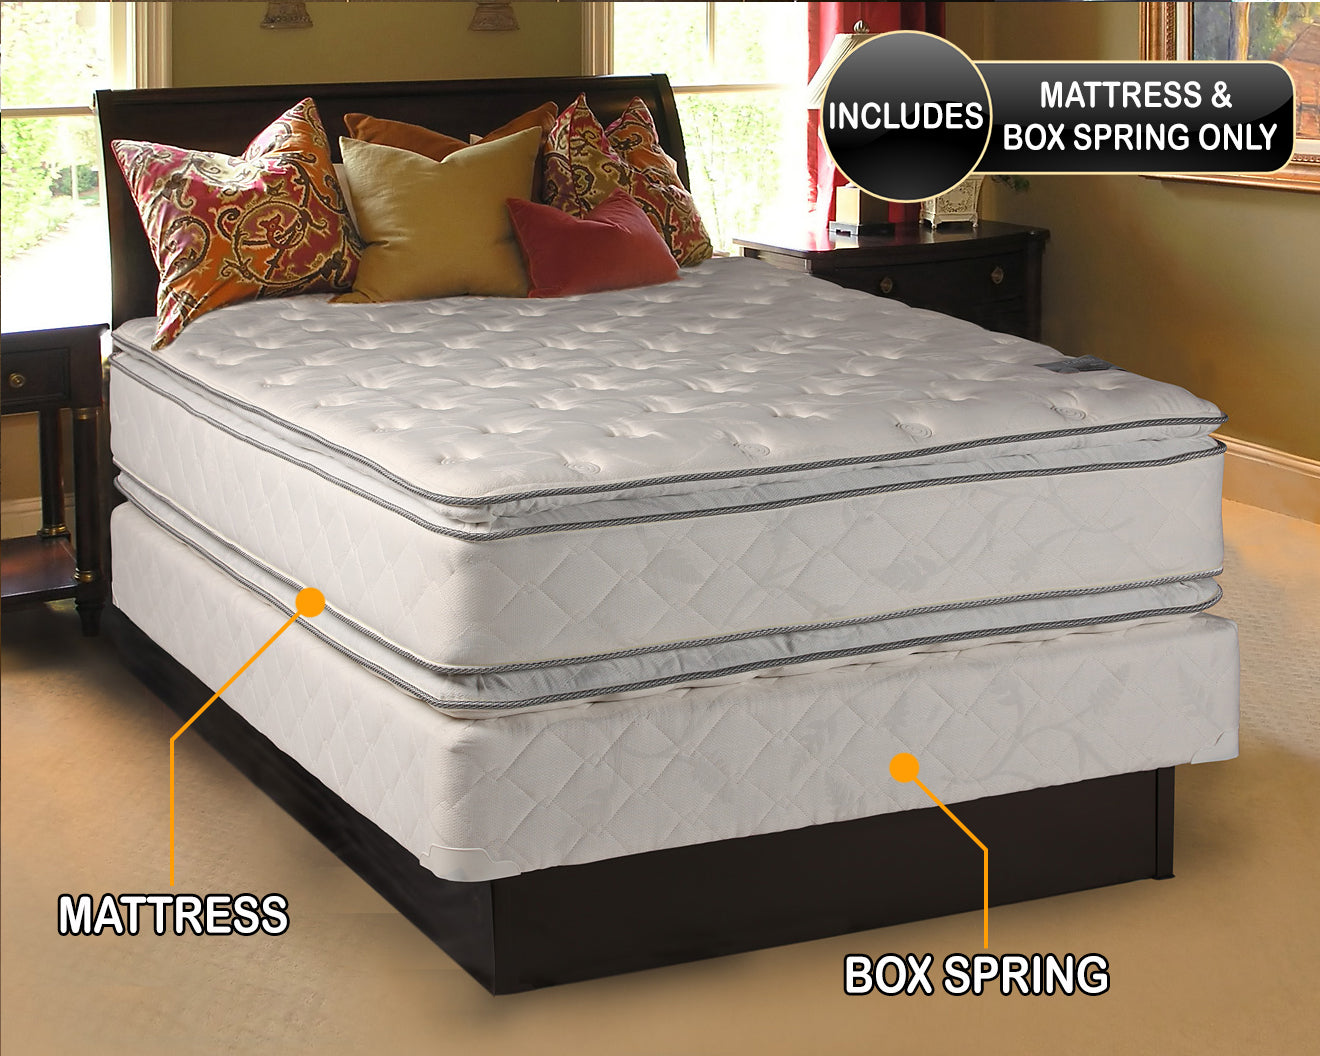 Natural Sleep Double Sided Queen Size Mattress and Box Spring Set